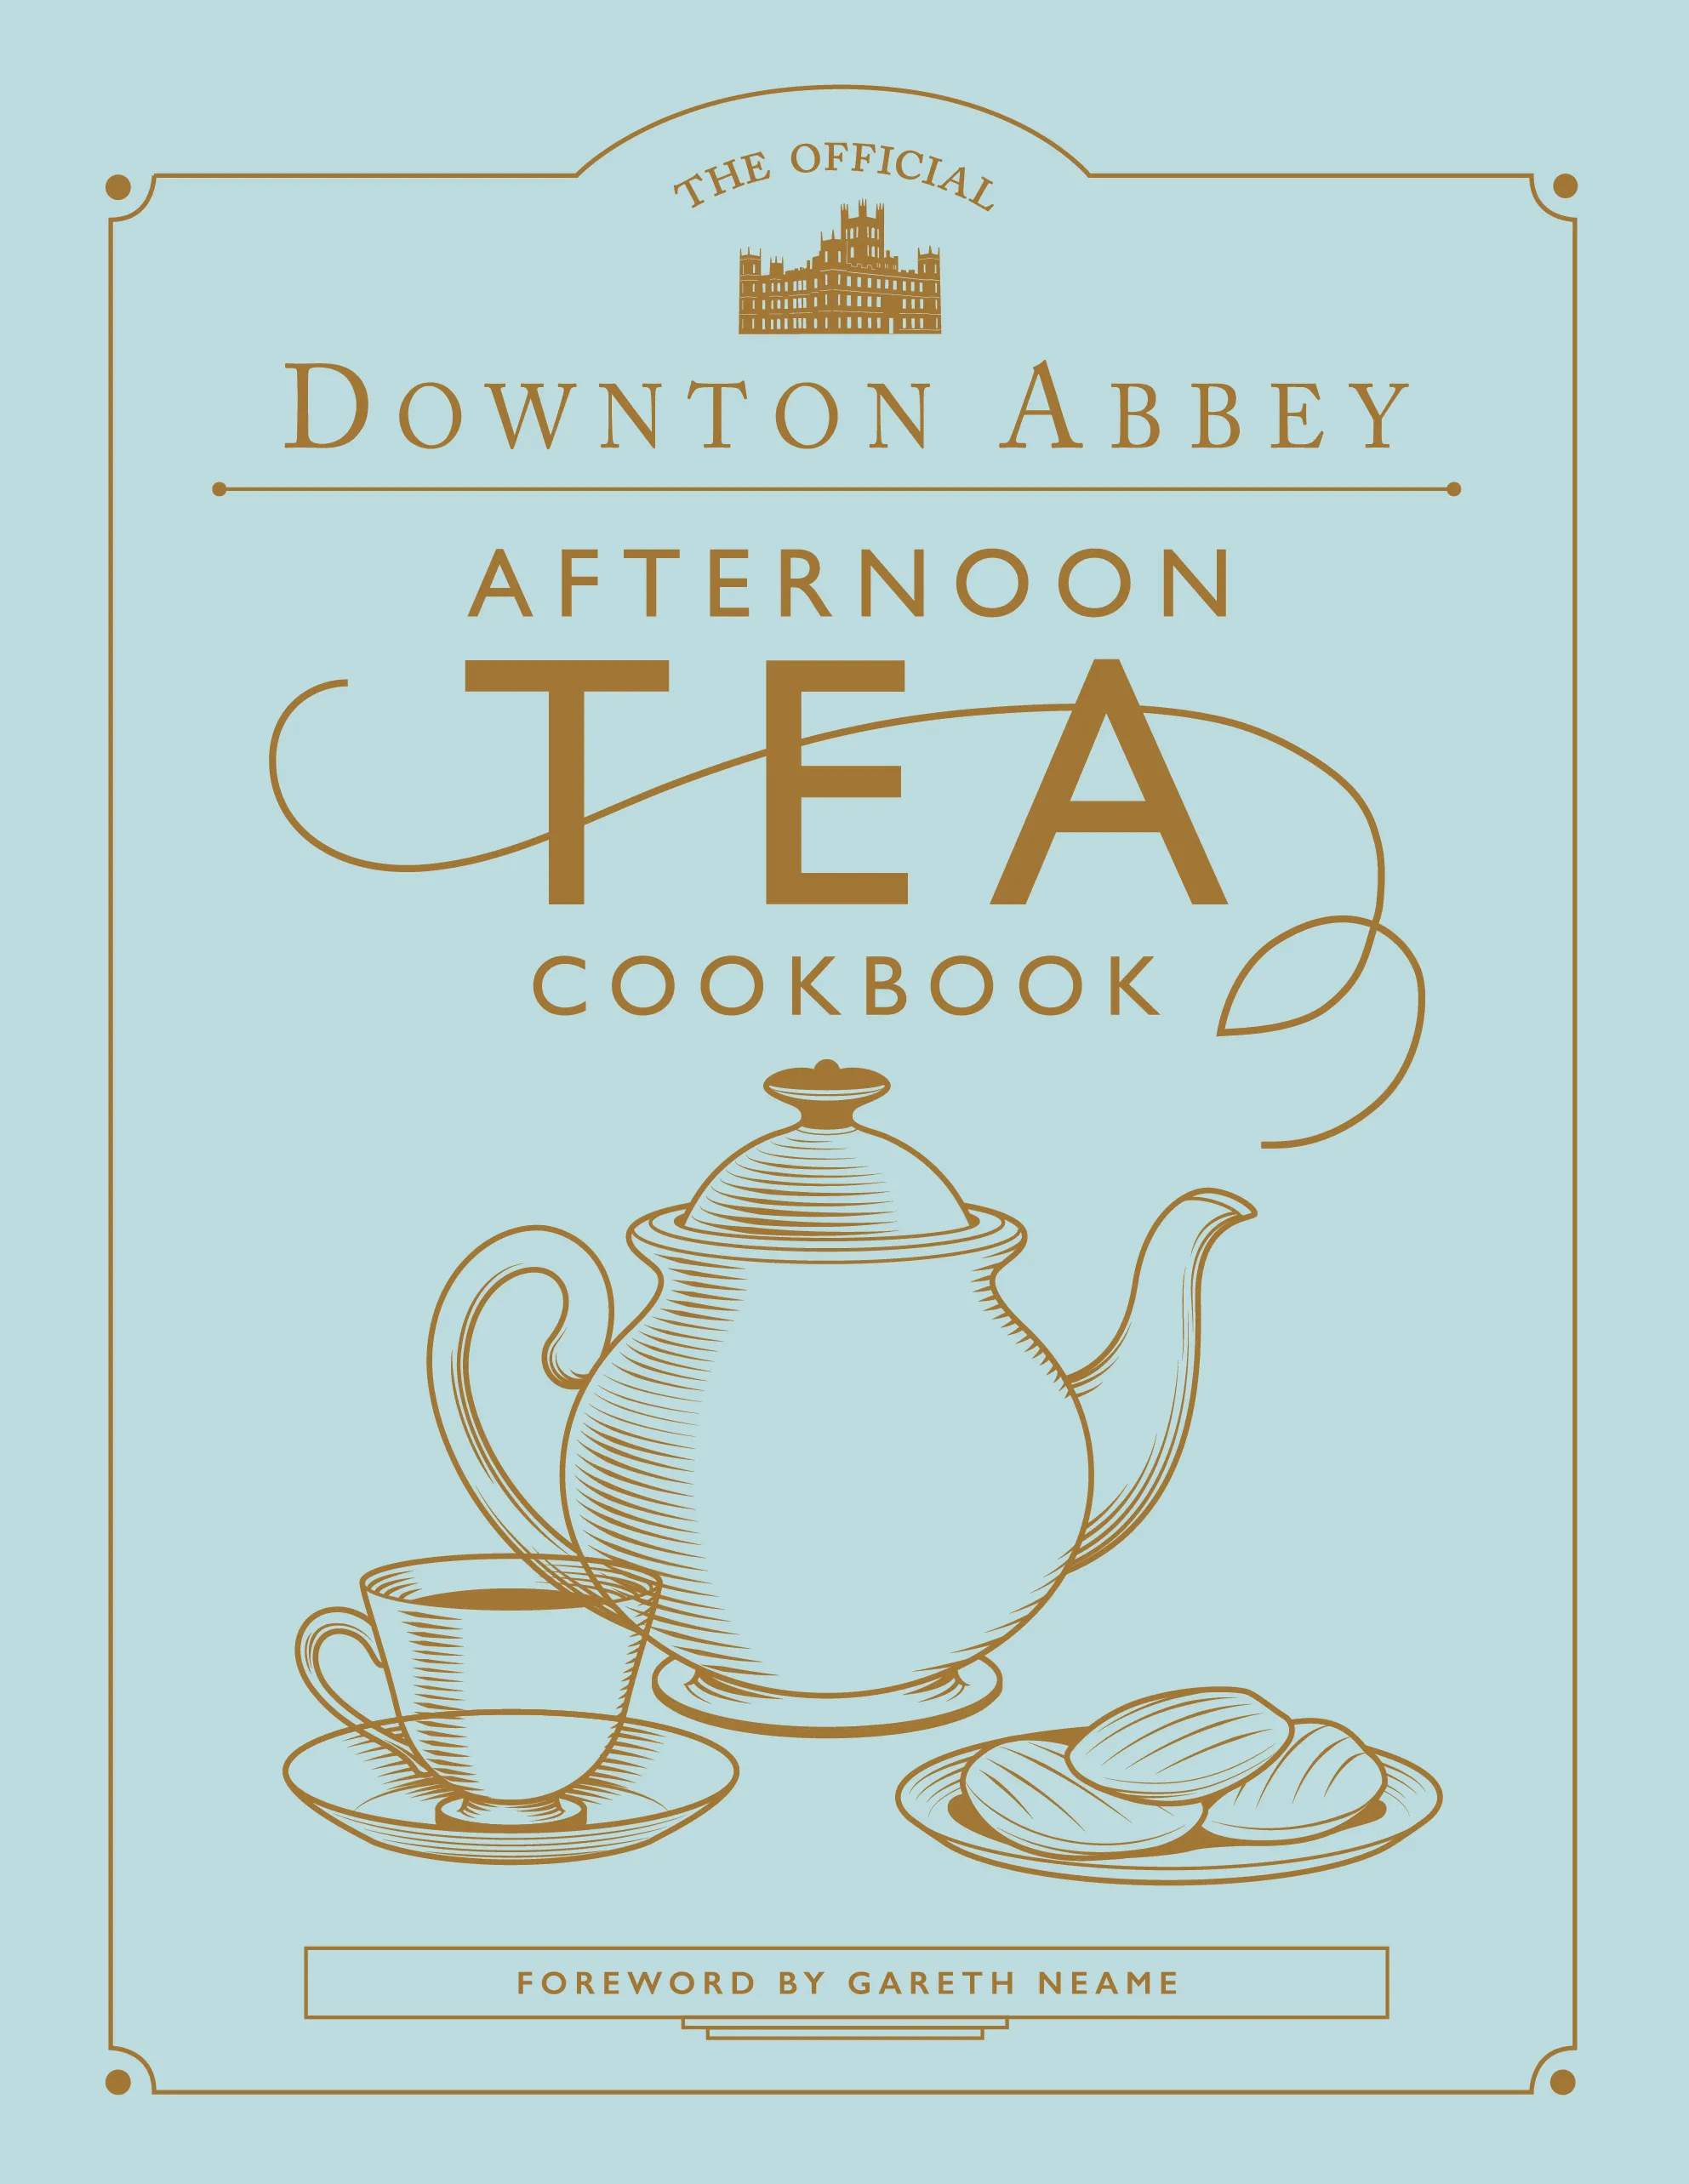 Downton Abbey Afternoon Tea